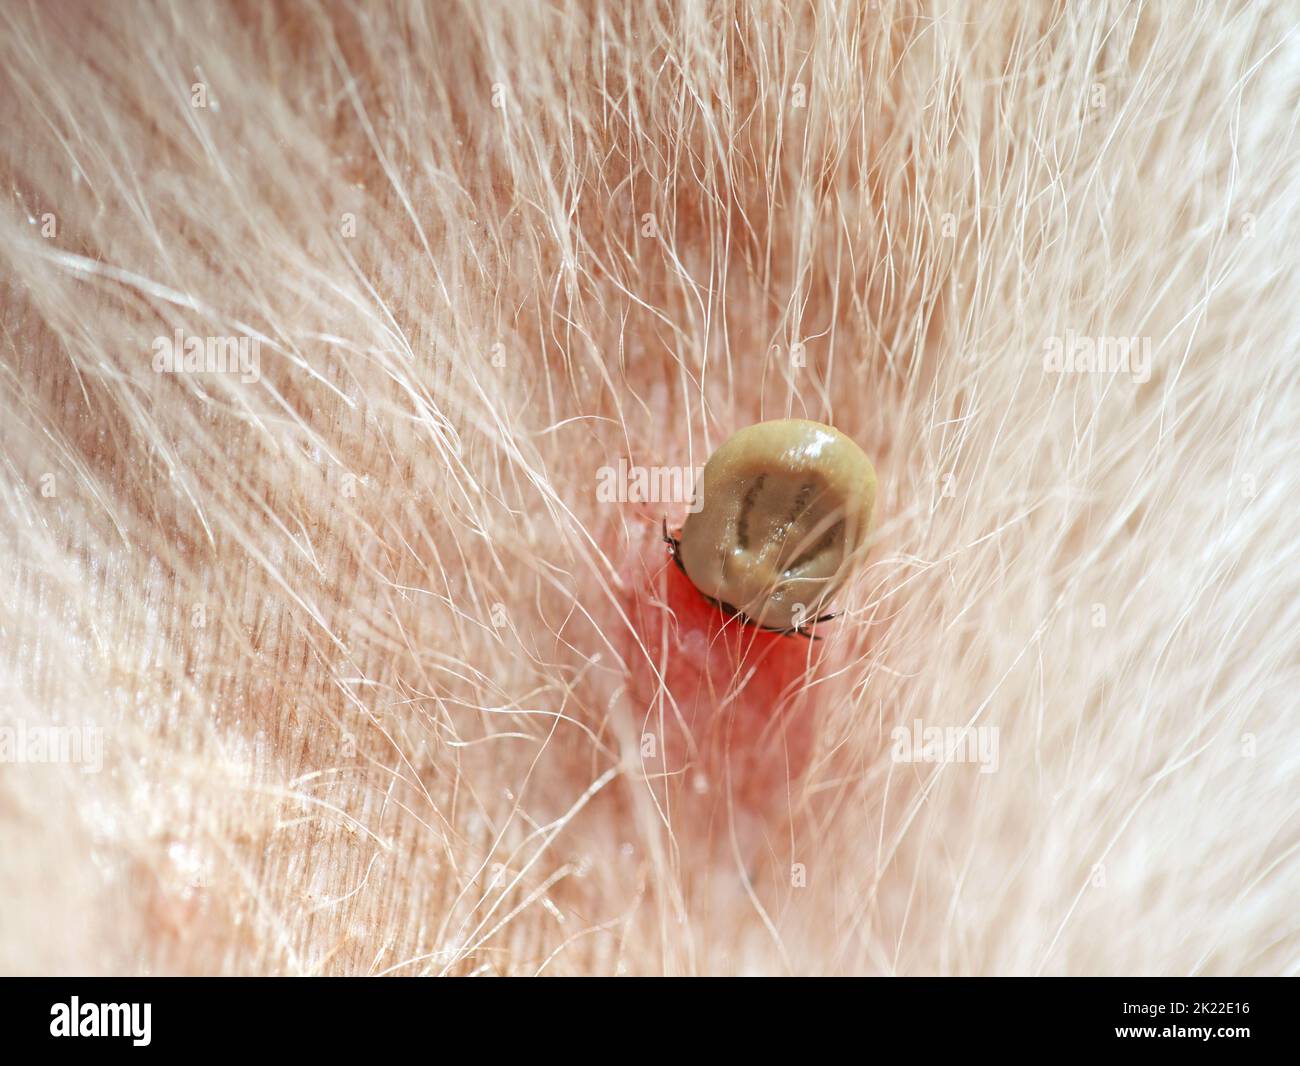 sucking tick with reddened skin in the fur of a white dog, infection by a tick bite on a pet Stock Photo